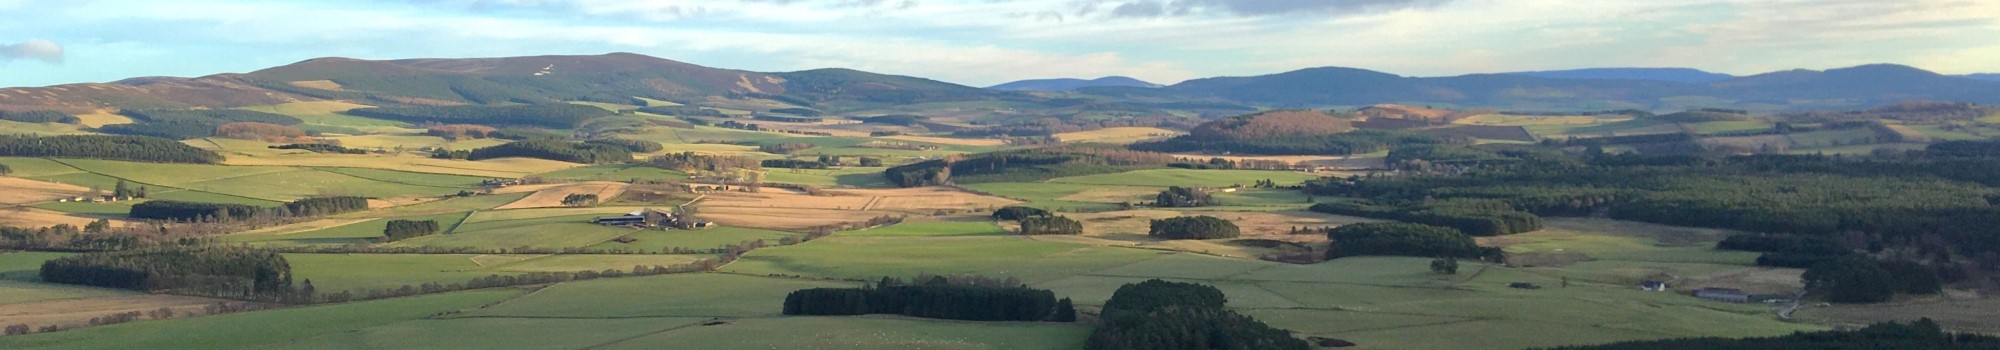 A sun-dappled landscape of fields, farms and forests looking towards Deeside in Aberdeenshire, Scotland. Credit: Kirsty Blackstock